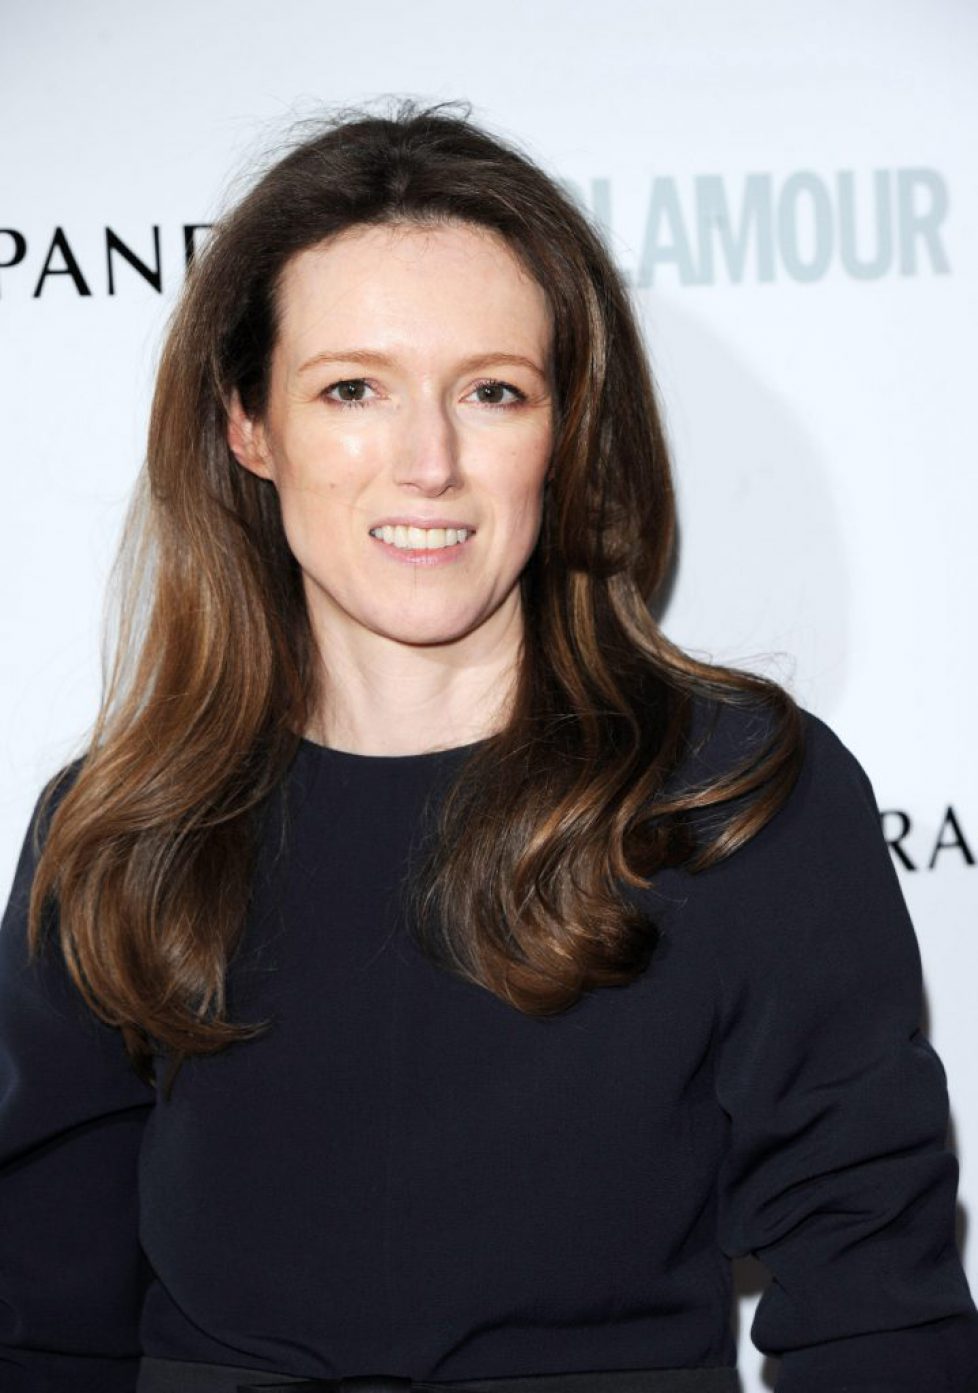 04.JUNE.2013. LONDON CLARE WAIGHT KELLER ATTENDS THE 2013 GLAMOUR AWARDS IN BERKLEY SQUARE.